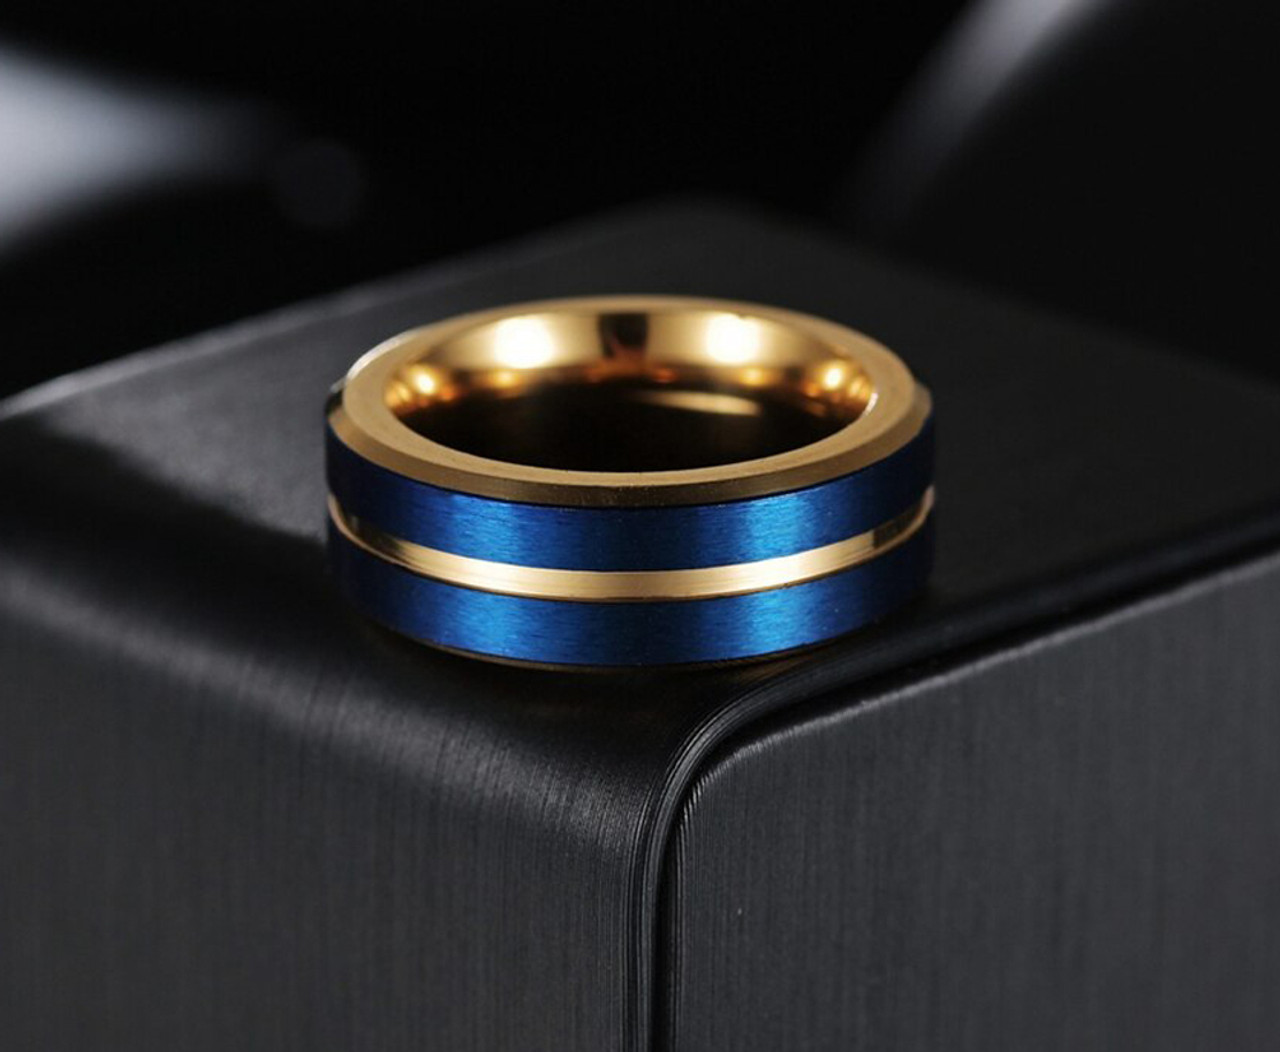 Men's Stainless Steel Wedding Bands (8mm). Blue with Gold Groove and Inner Gold. High Polish Inside and Matte Finish Brushed Top.